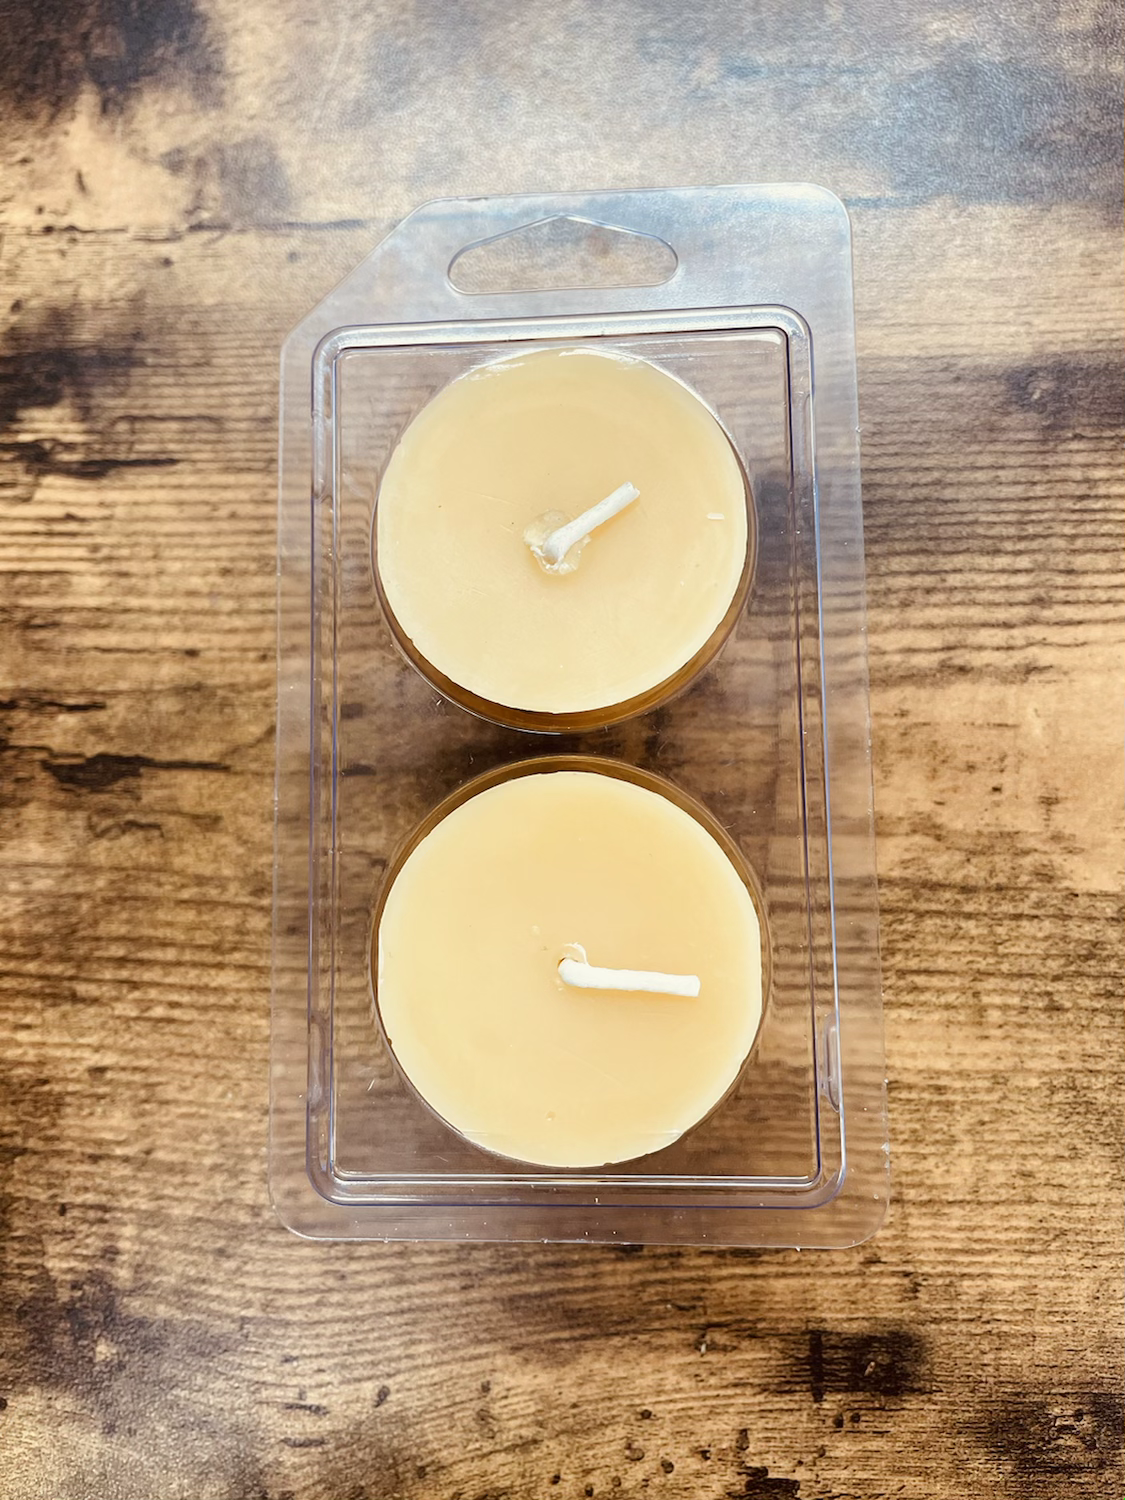 2 - VOTIVES, 100% Pure Natural Yellow Beeswax , Long Burning, Honey Scent, Cabin